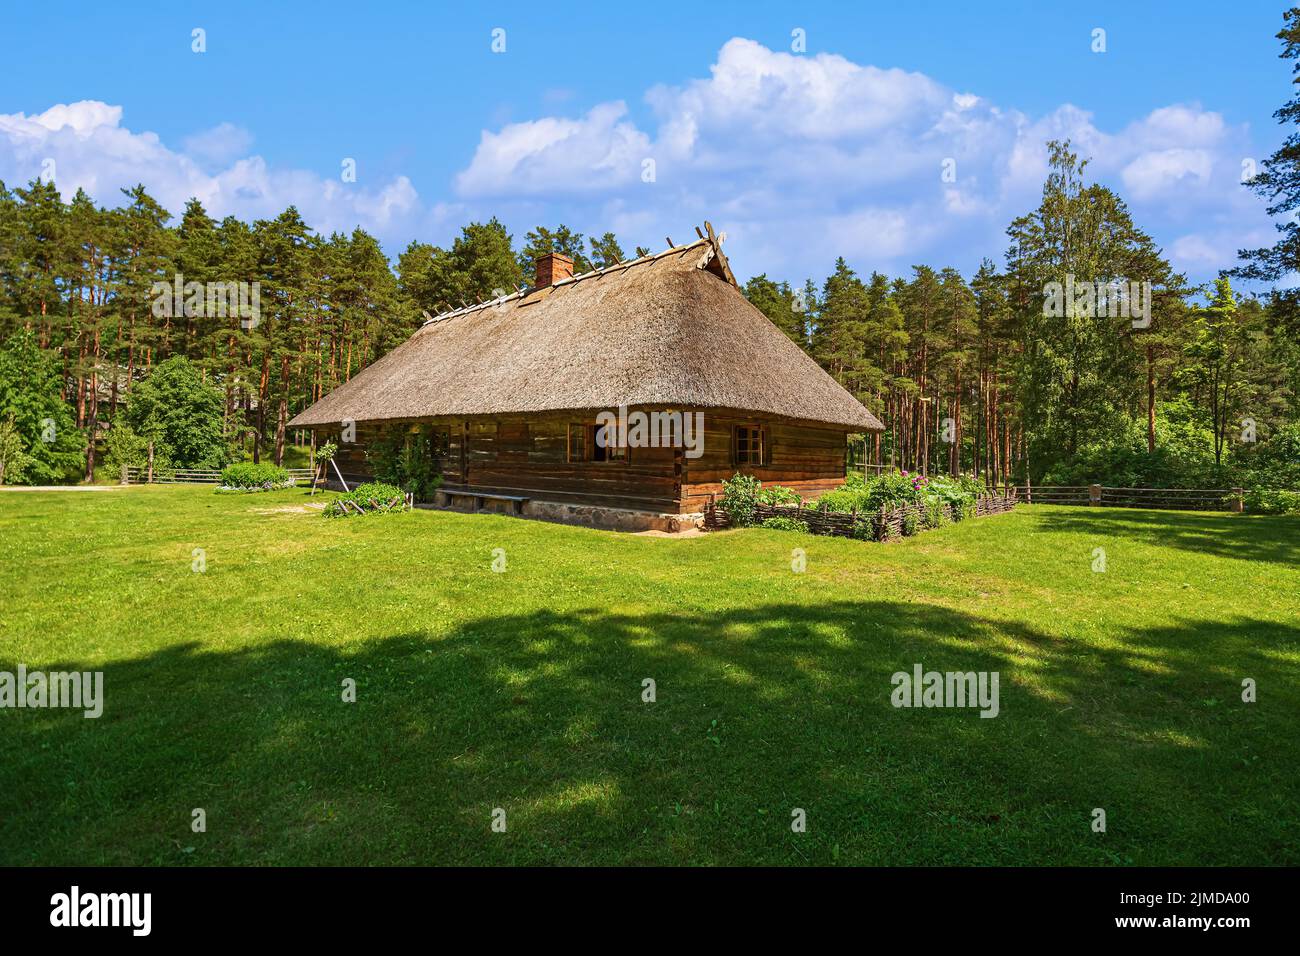 Old house in rural area Stock Photo